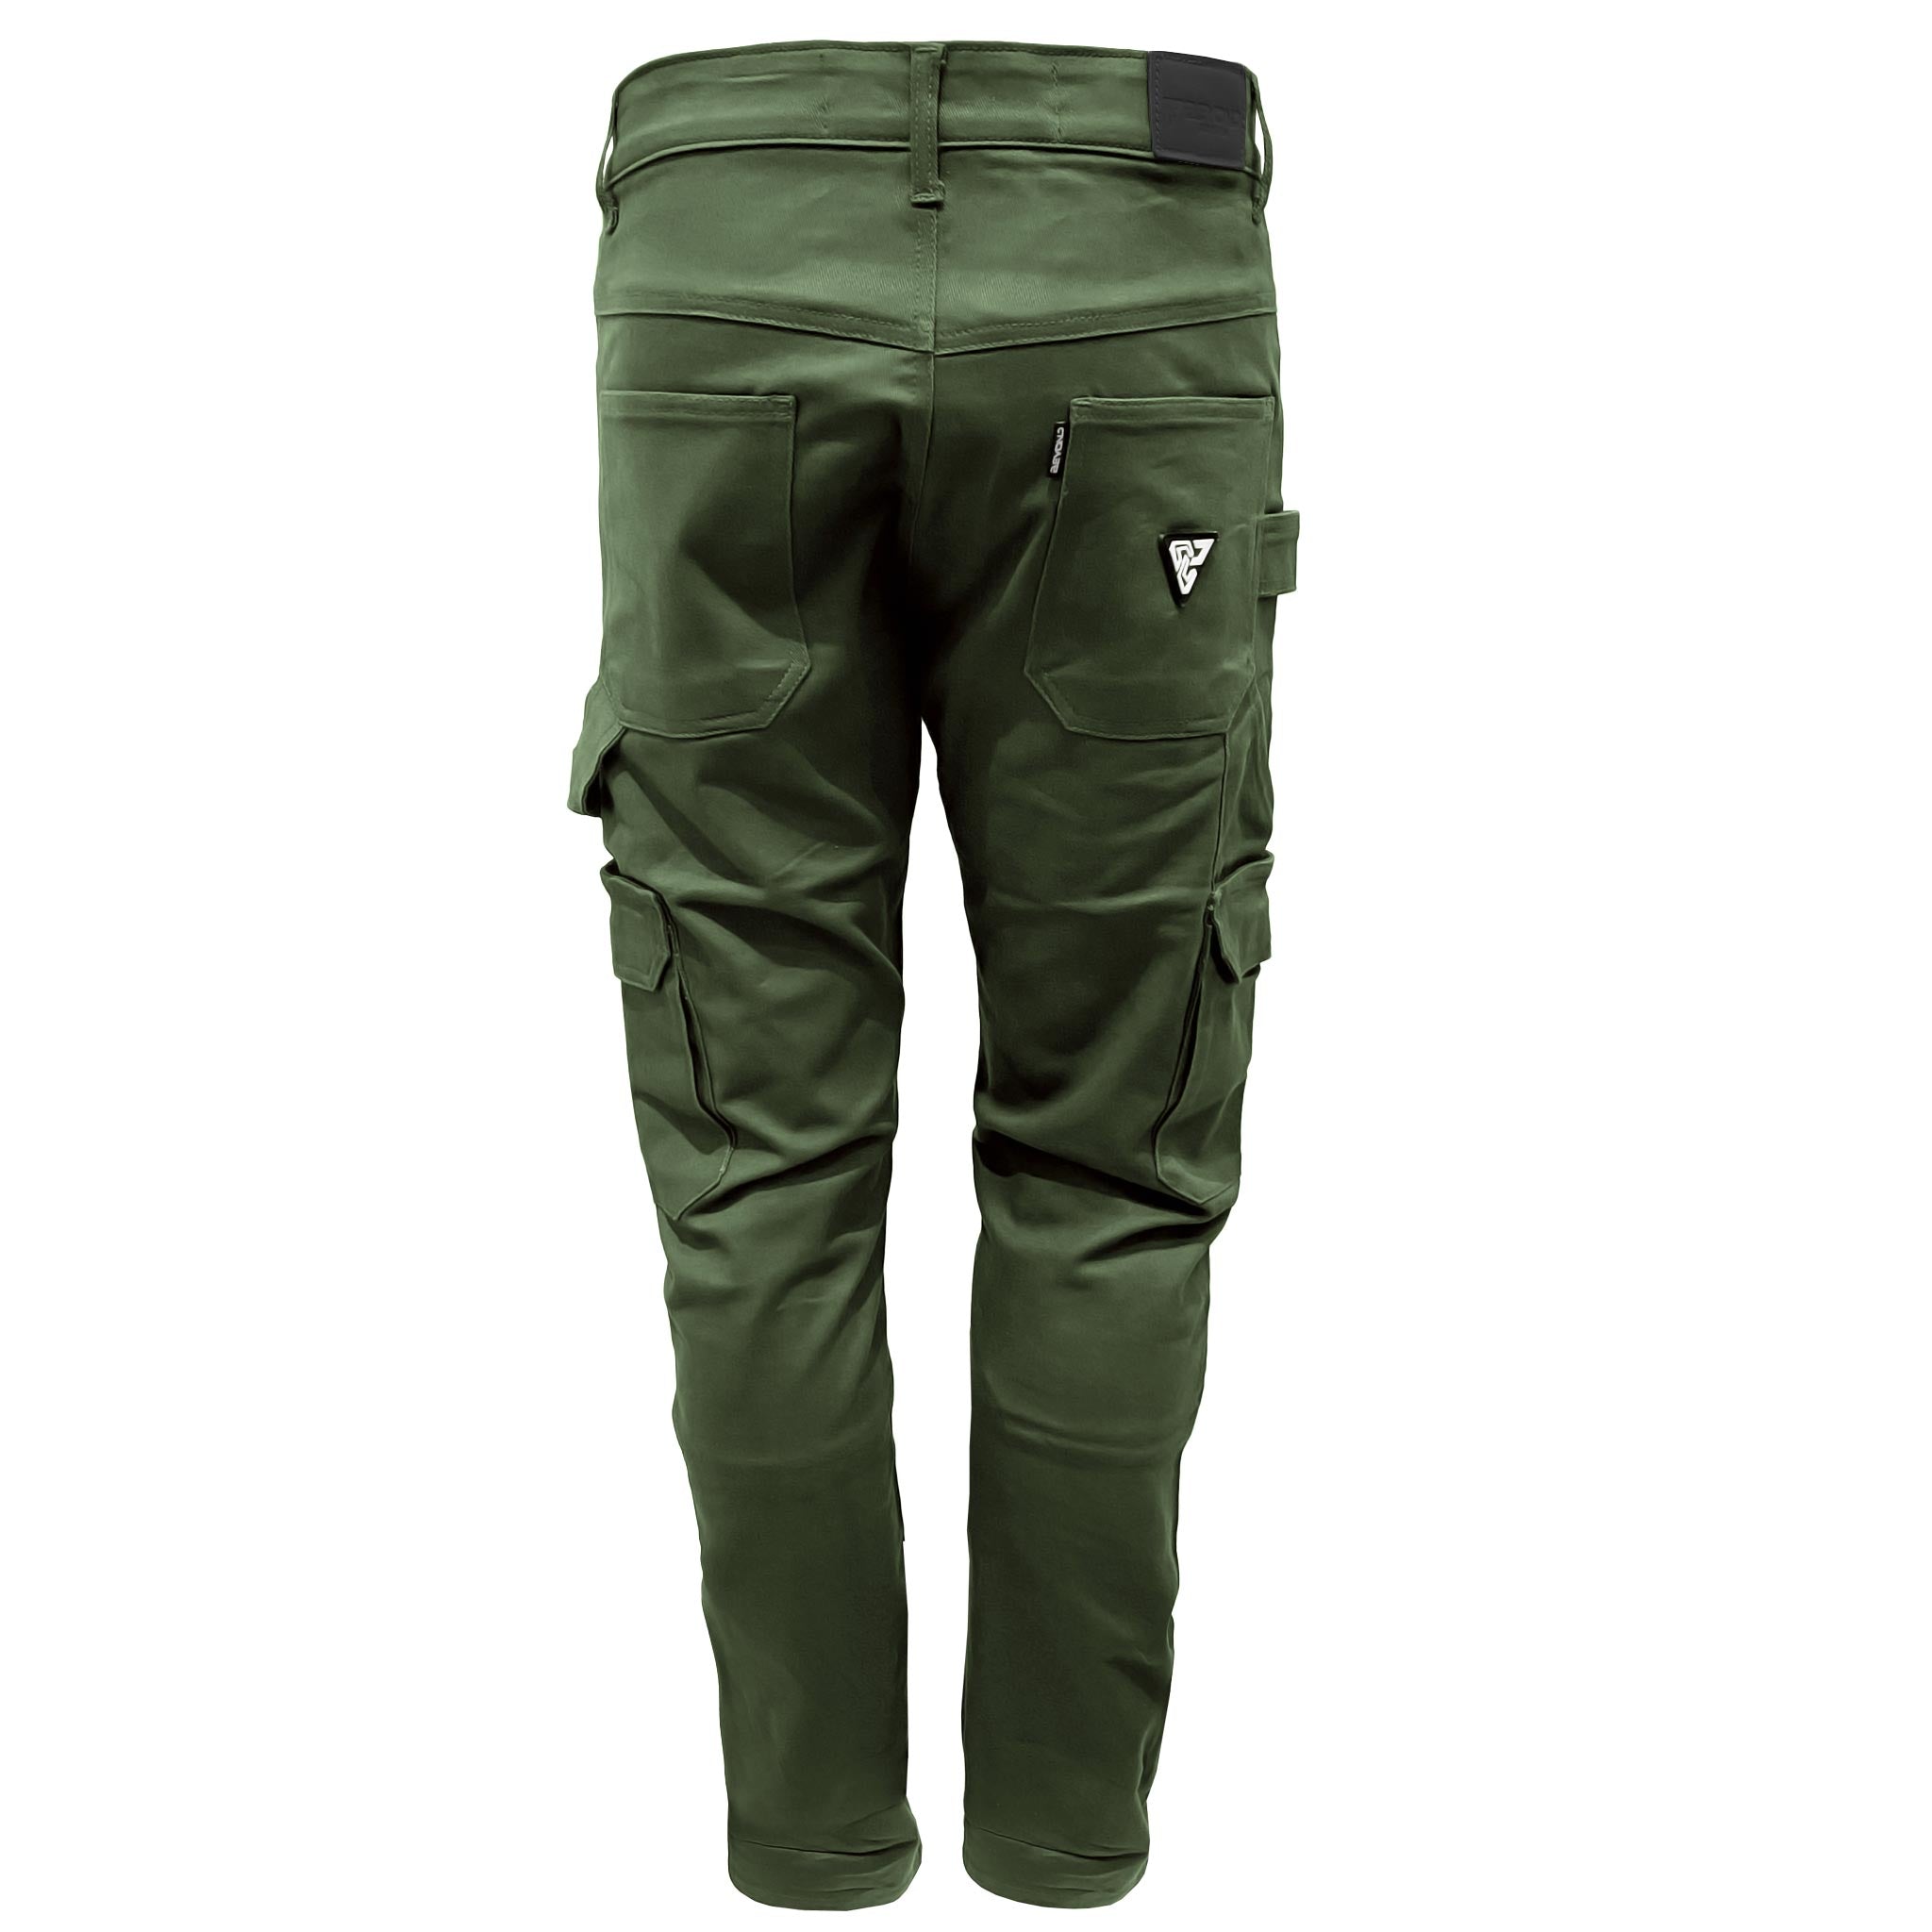 Straight Leg Cargo Pants - Army Green with Pads